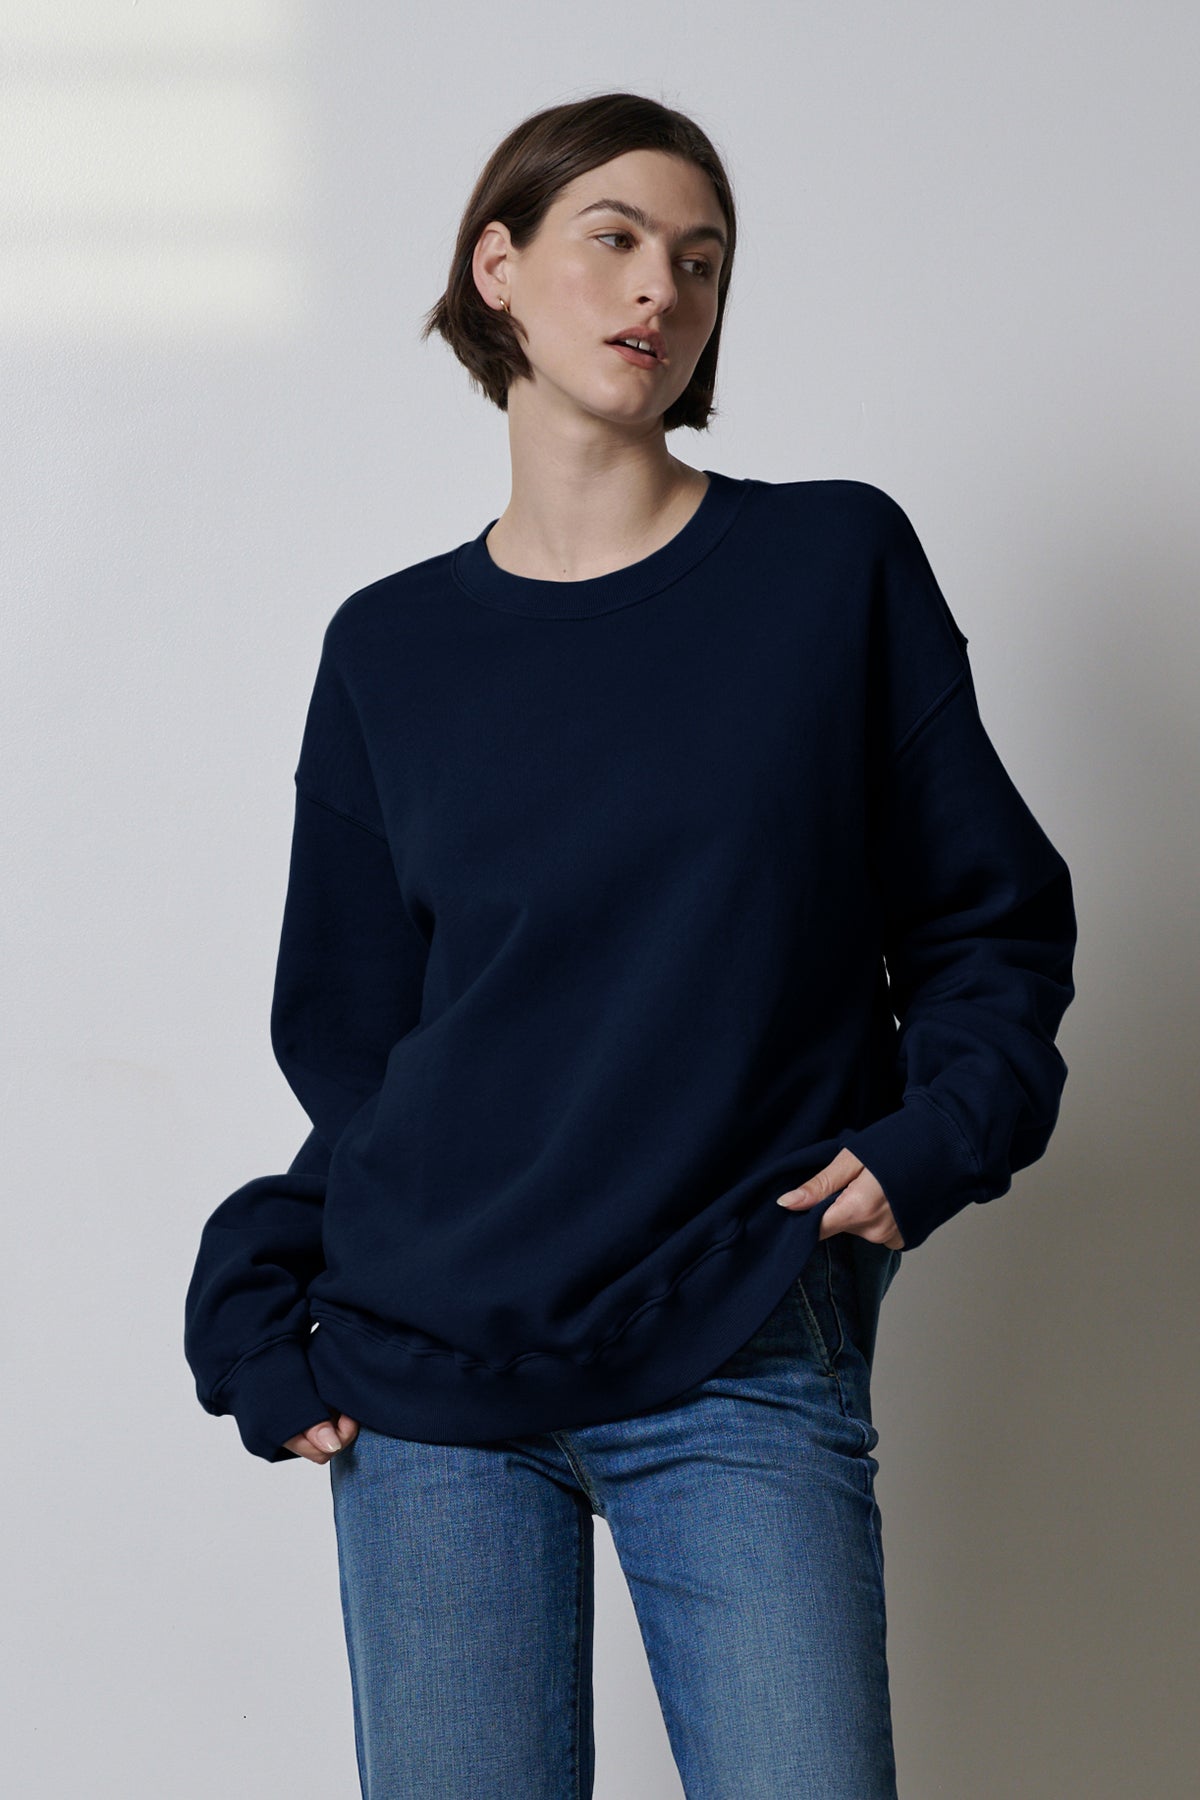 The model is wearing an ABBOT SWEATSHIRT by Velvet by Jenny Graham, showcasing styling versatility.-35495989674177